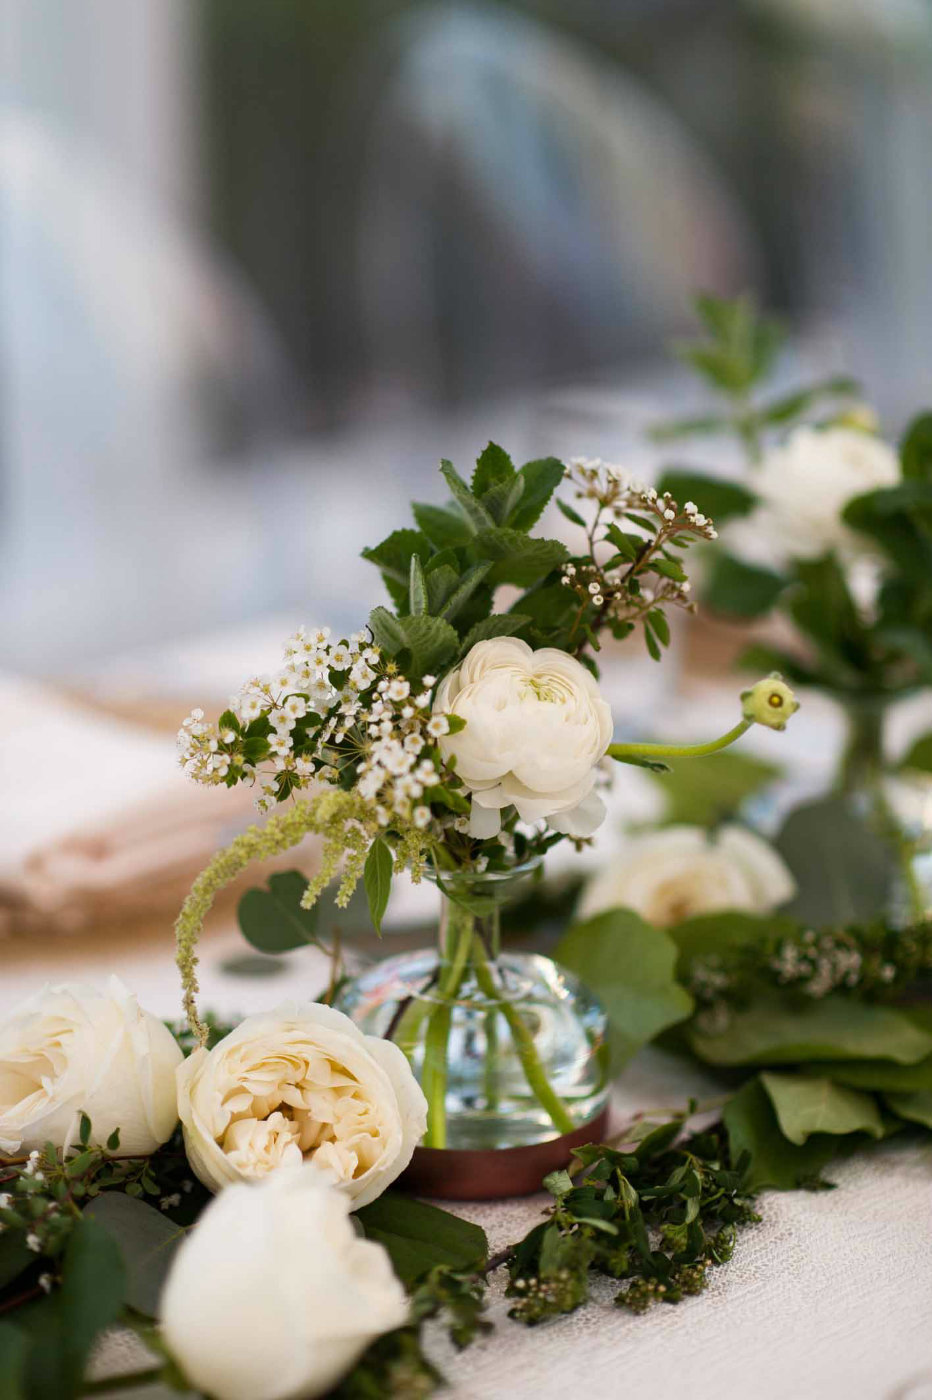 Small bud vases of greenery and white ranunculus are placed in the green garland on the head table.